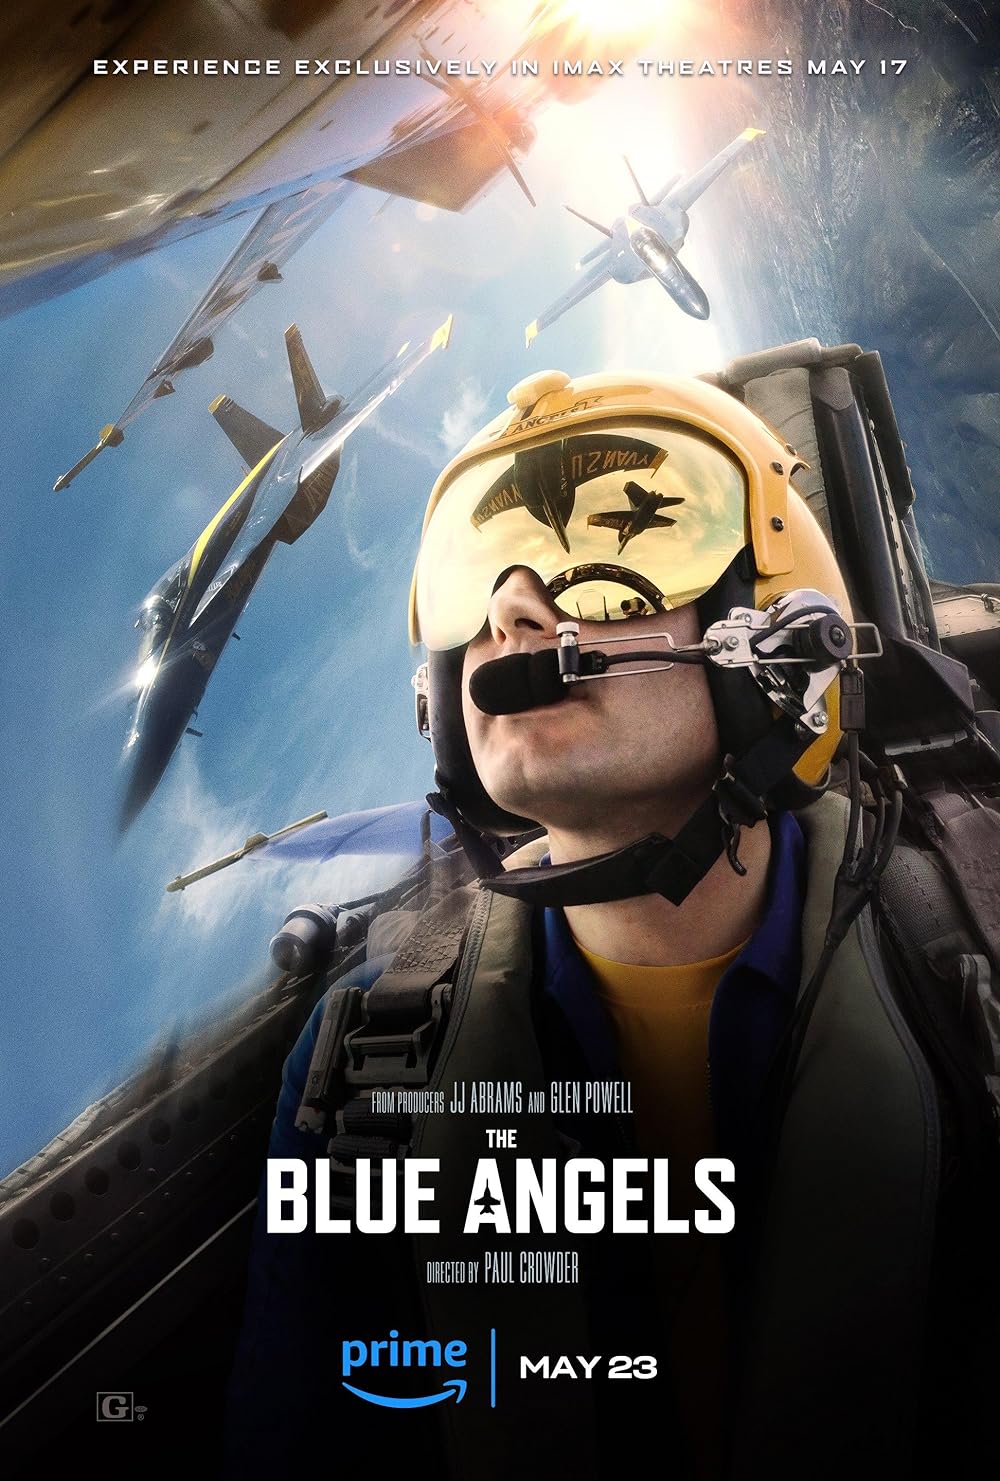 The Blue Angels (Prime Video) – May 23Directed by Paul Crowder and produced by Glen Powell and J.J. Abrams, 